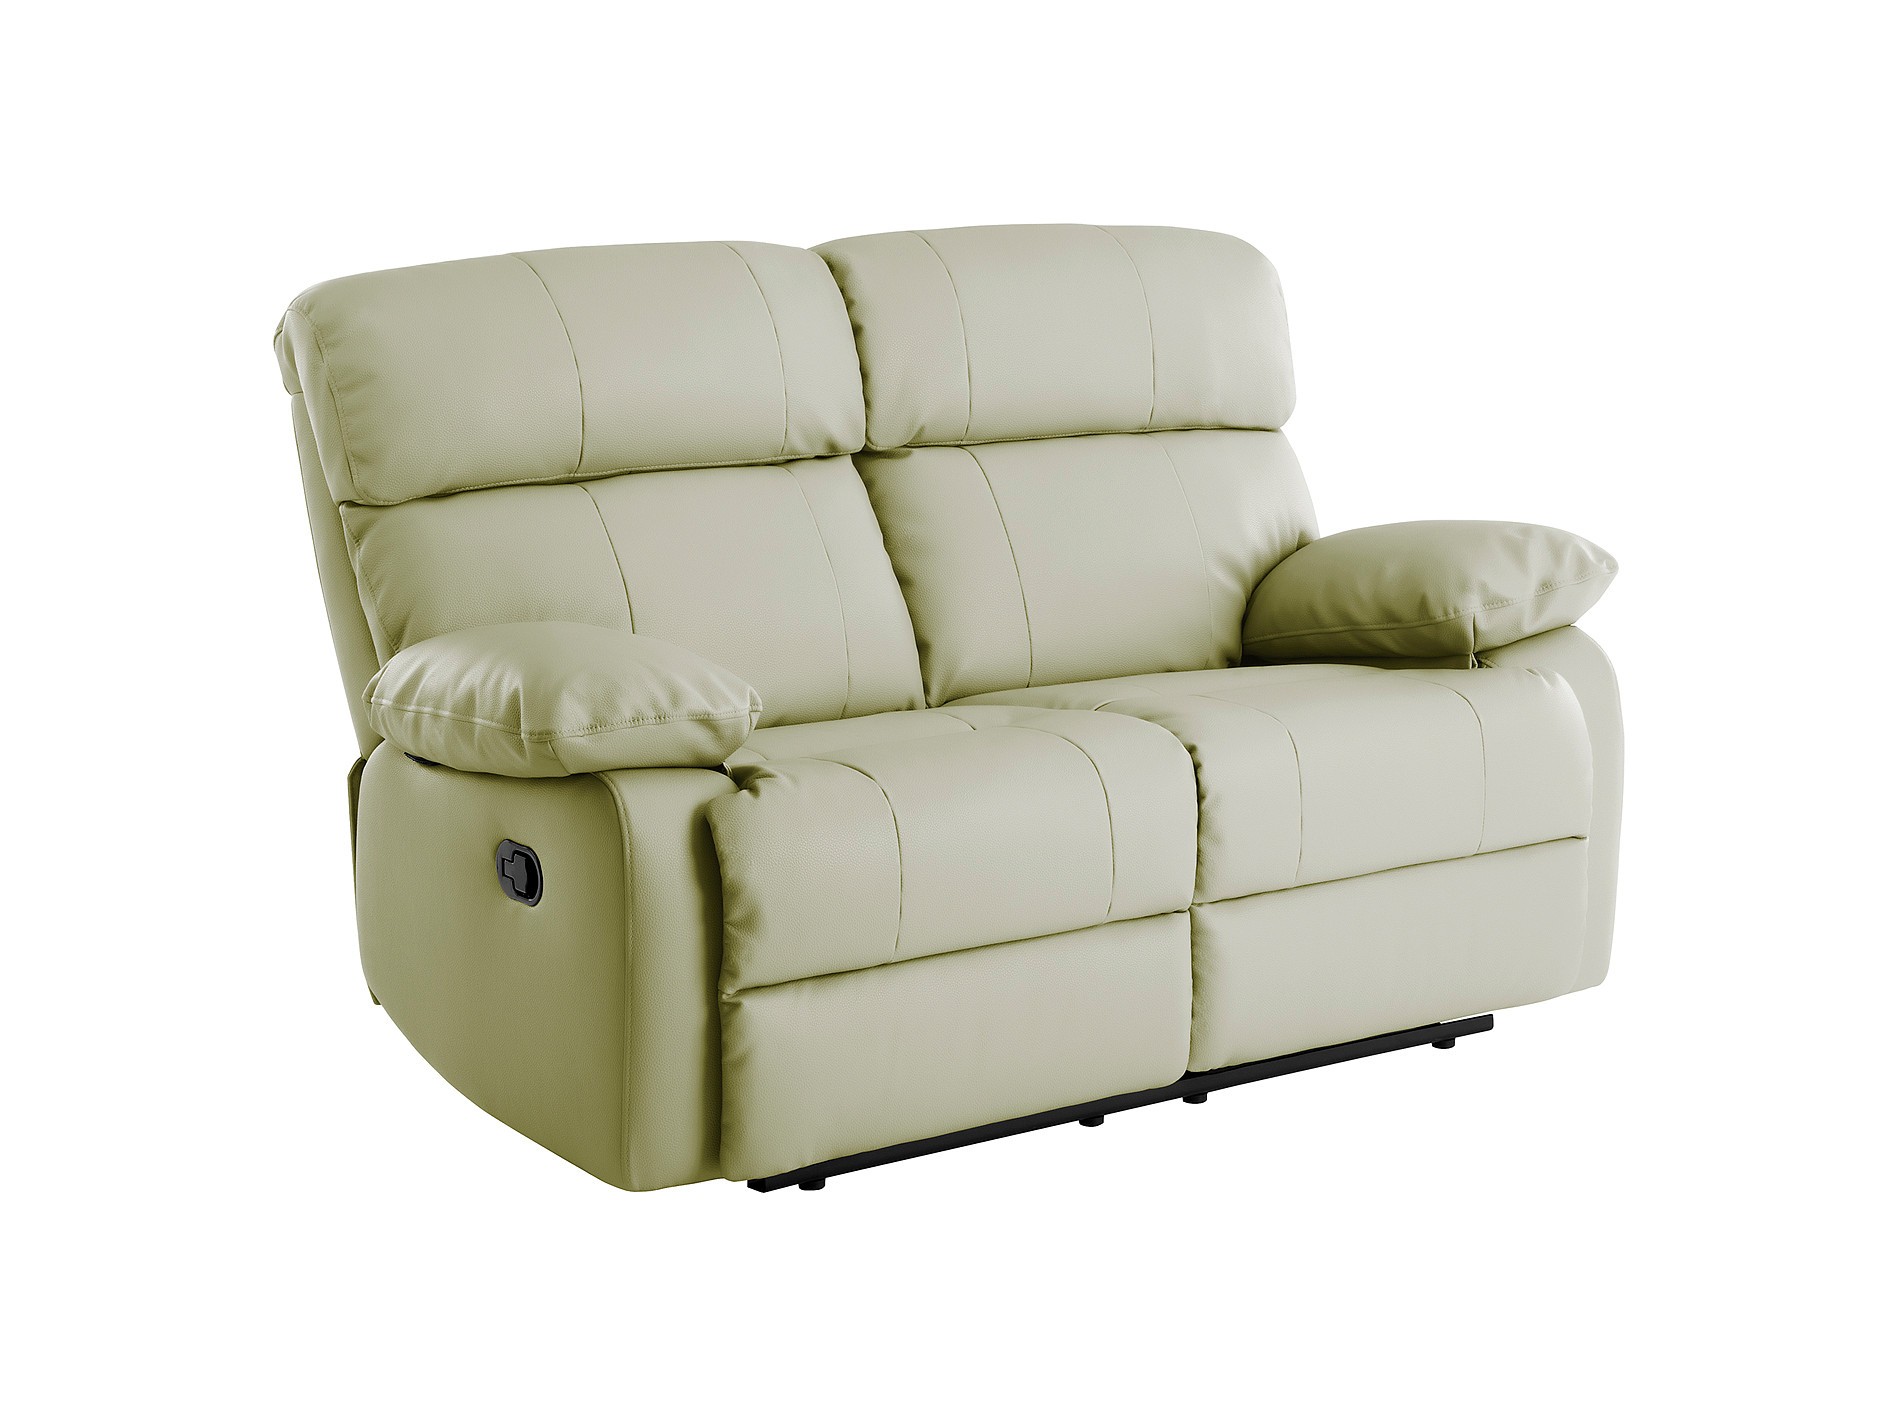 Sheffield small sofa with electric recliners in putty leather